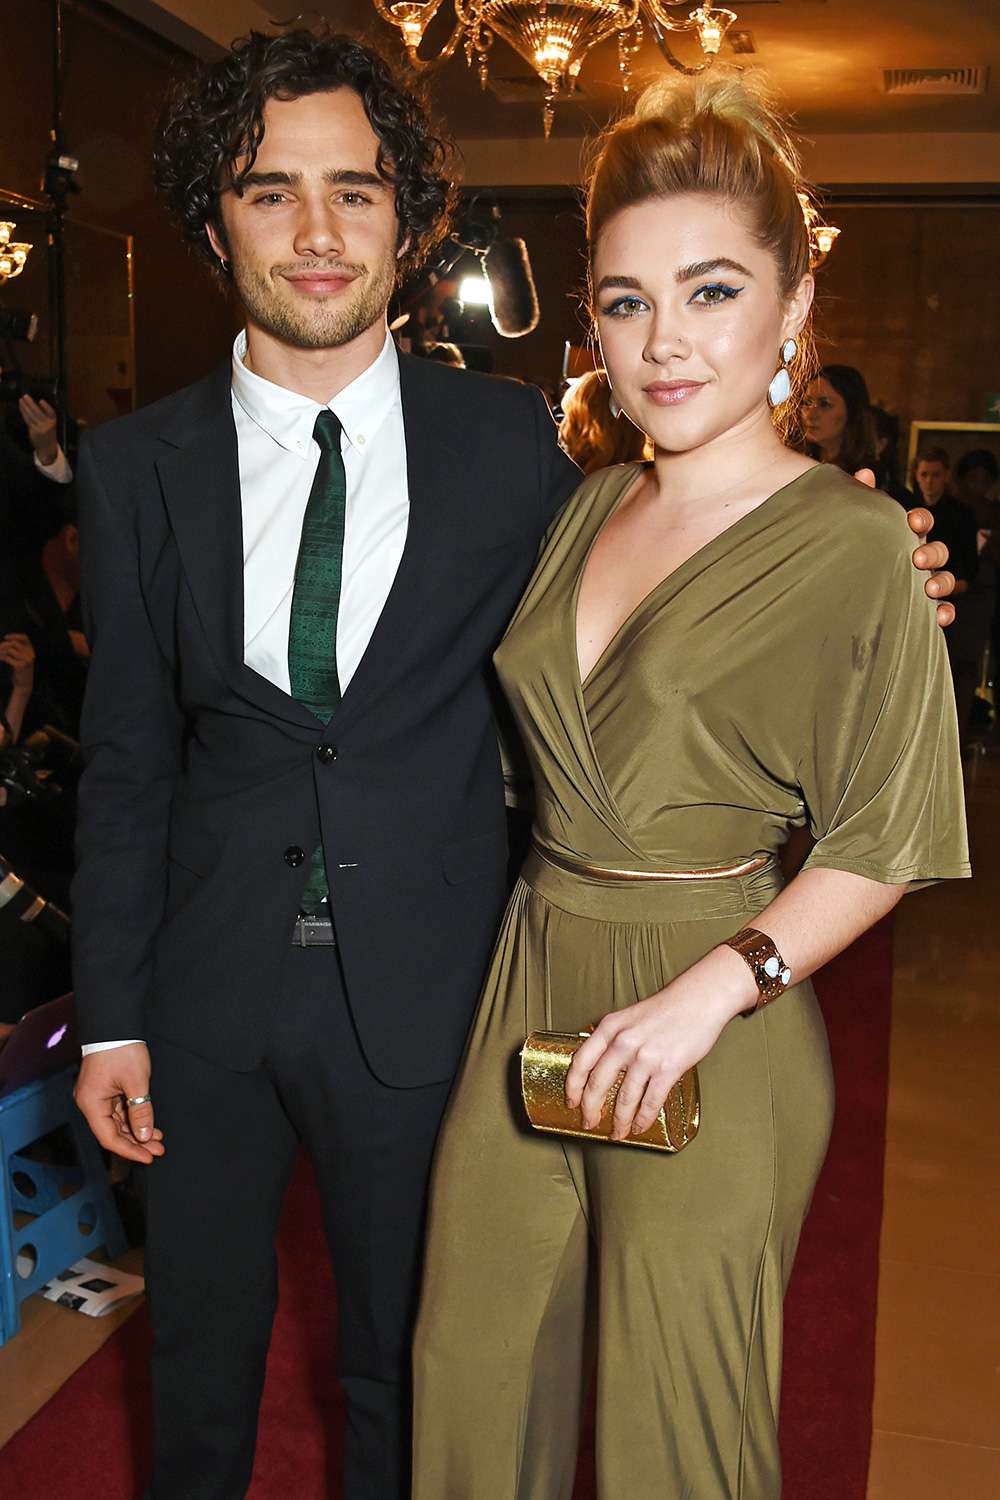 Toby Sebastian (L) and Florence Pugh arrive at The London Critics' Circle Film Awards at The May Fair Hotel on January 17, 2016 in London, England